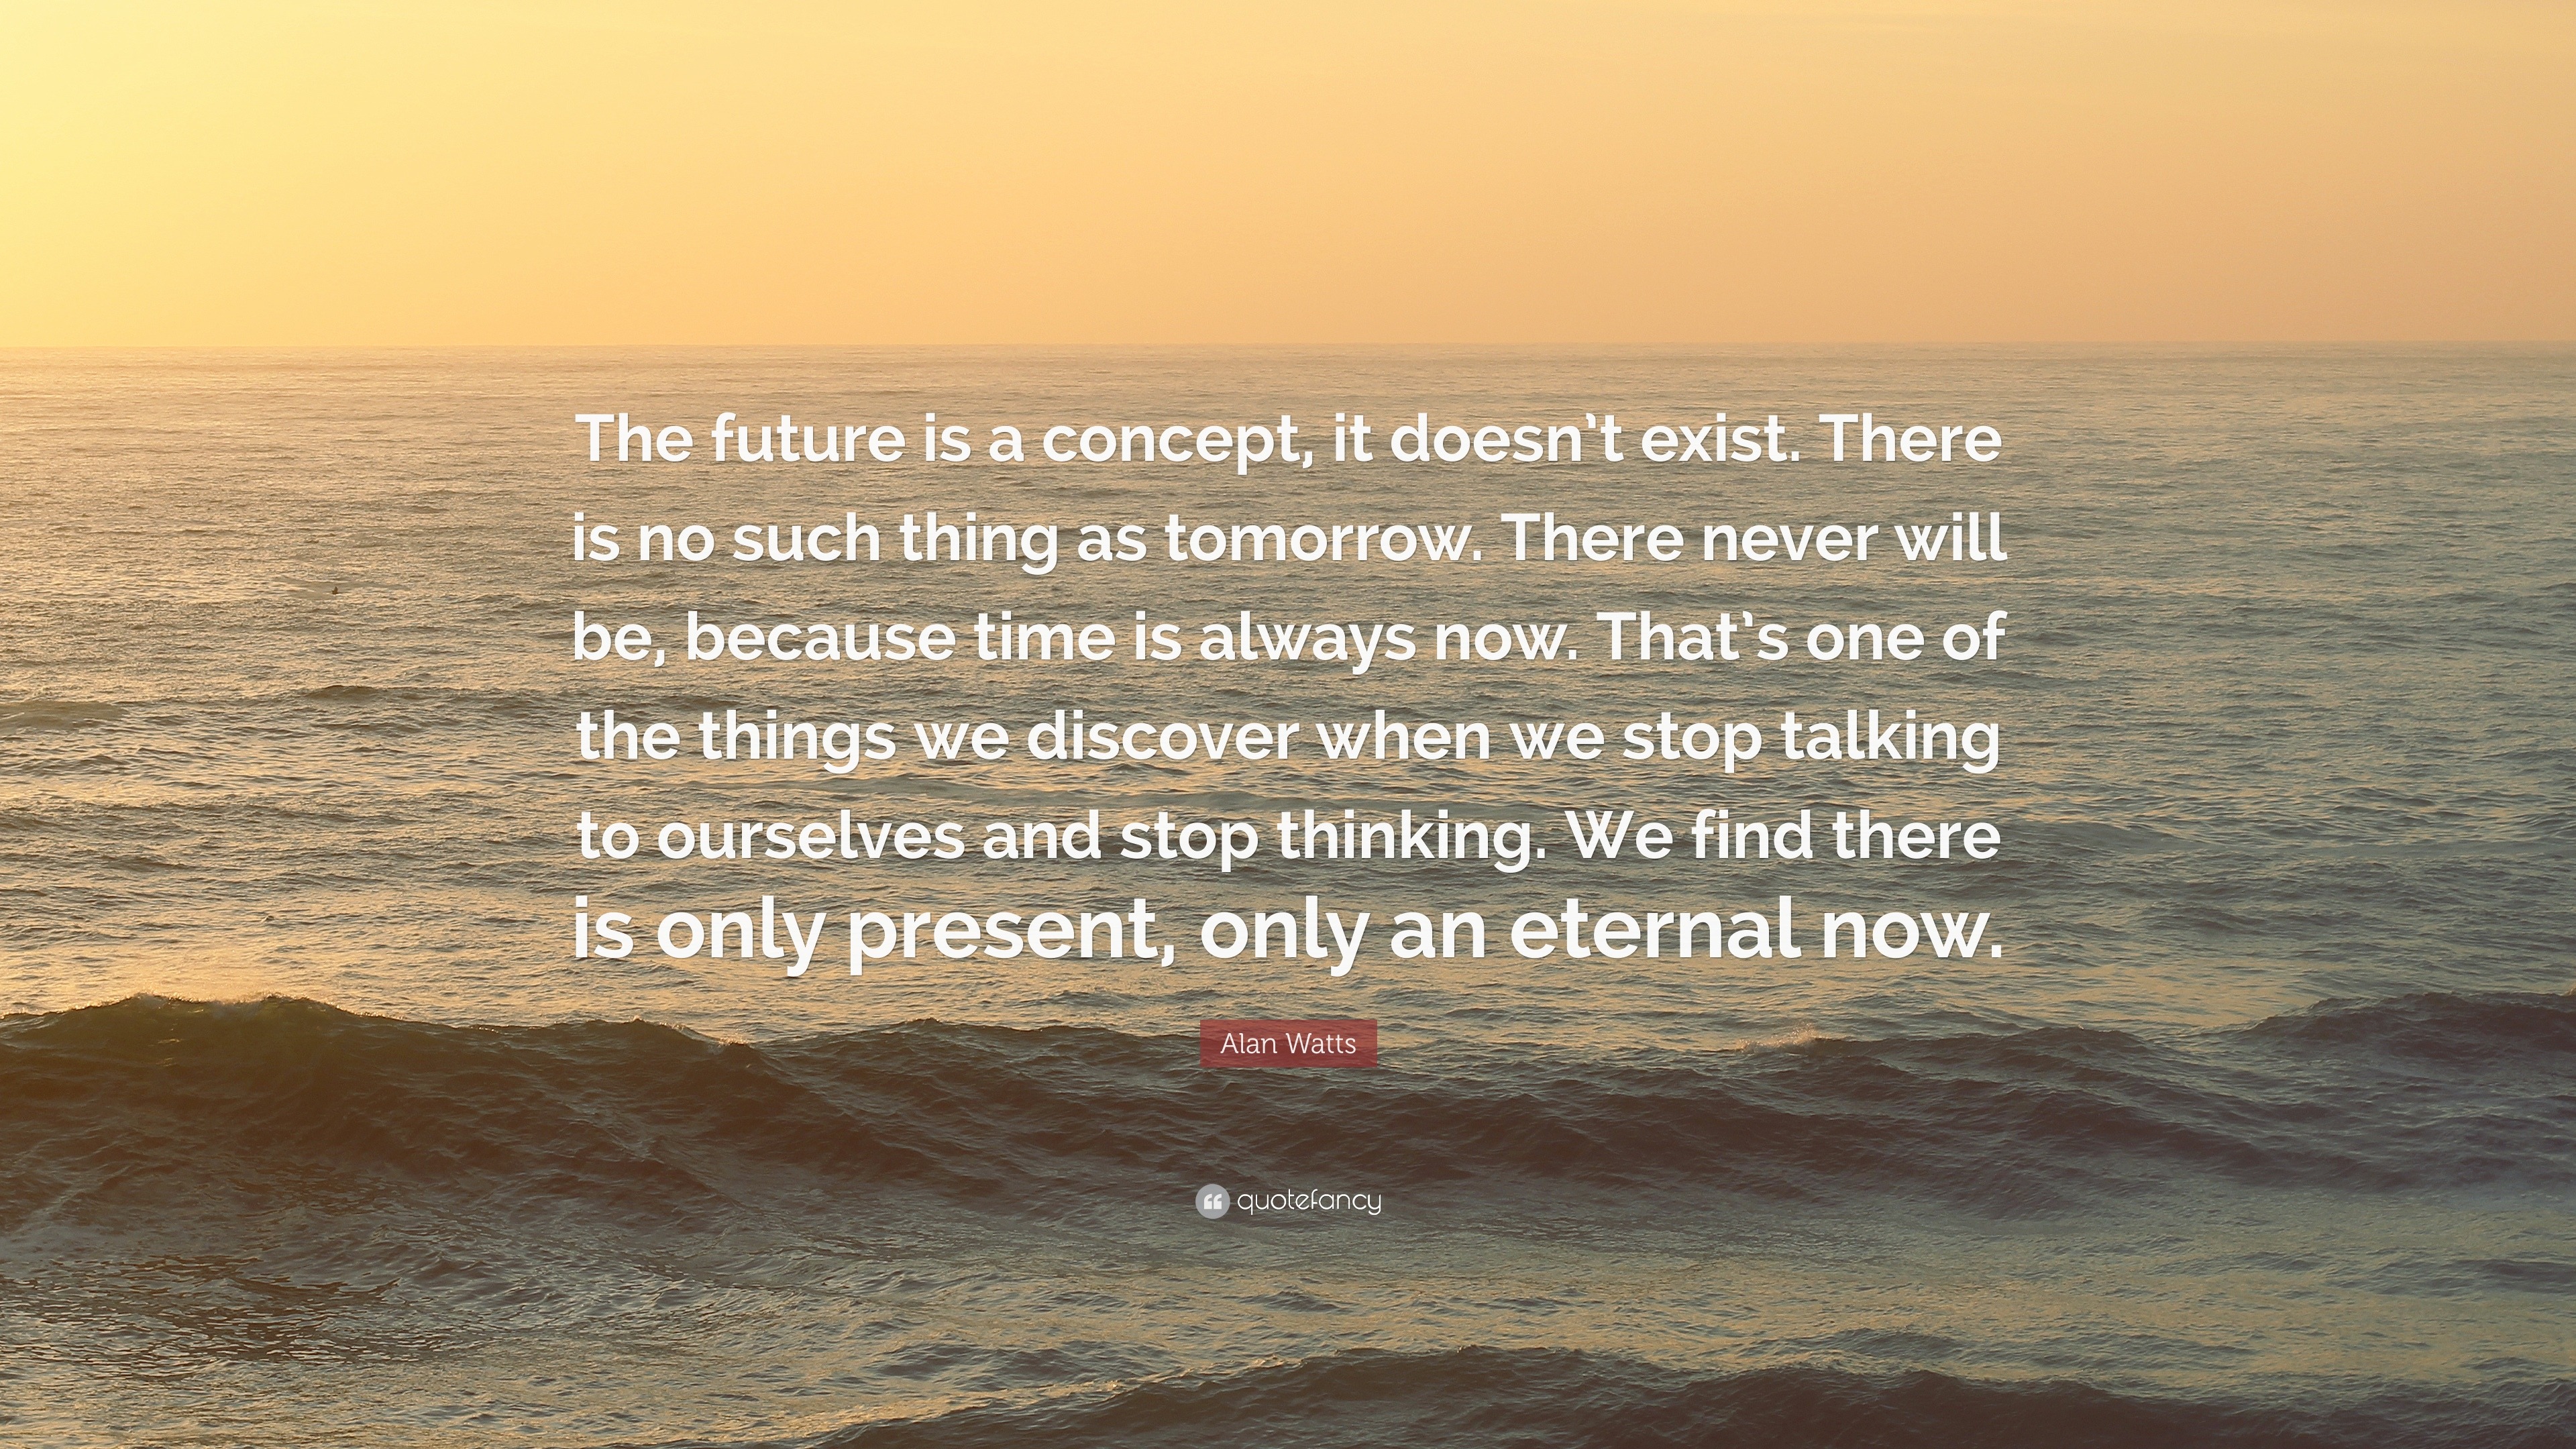 Alan Watts Quote: “The future is a concept, it doesn’t exist. There is